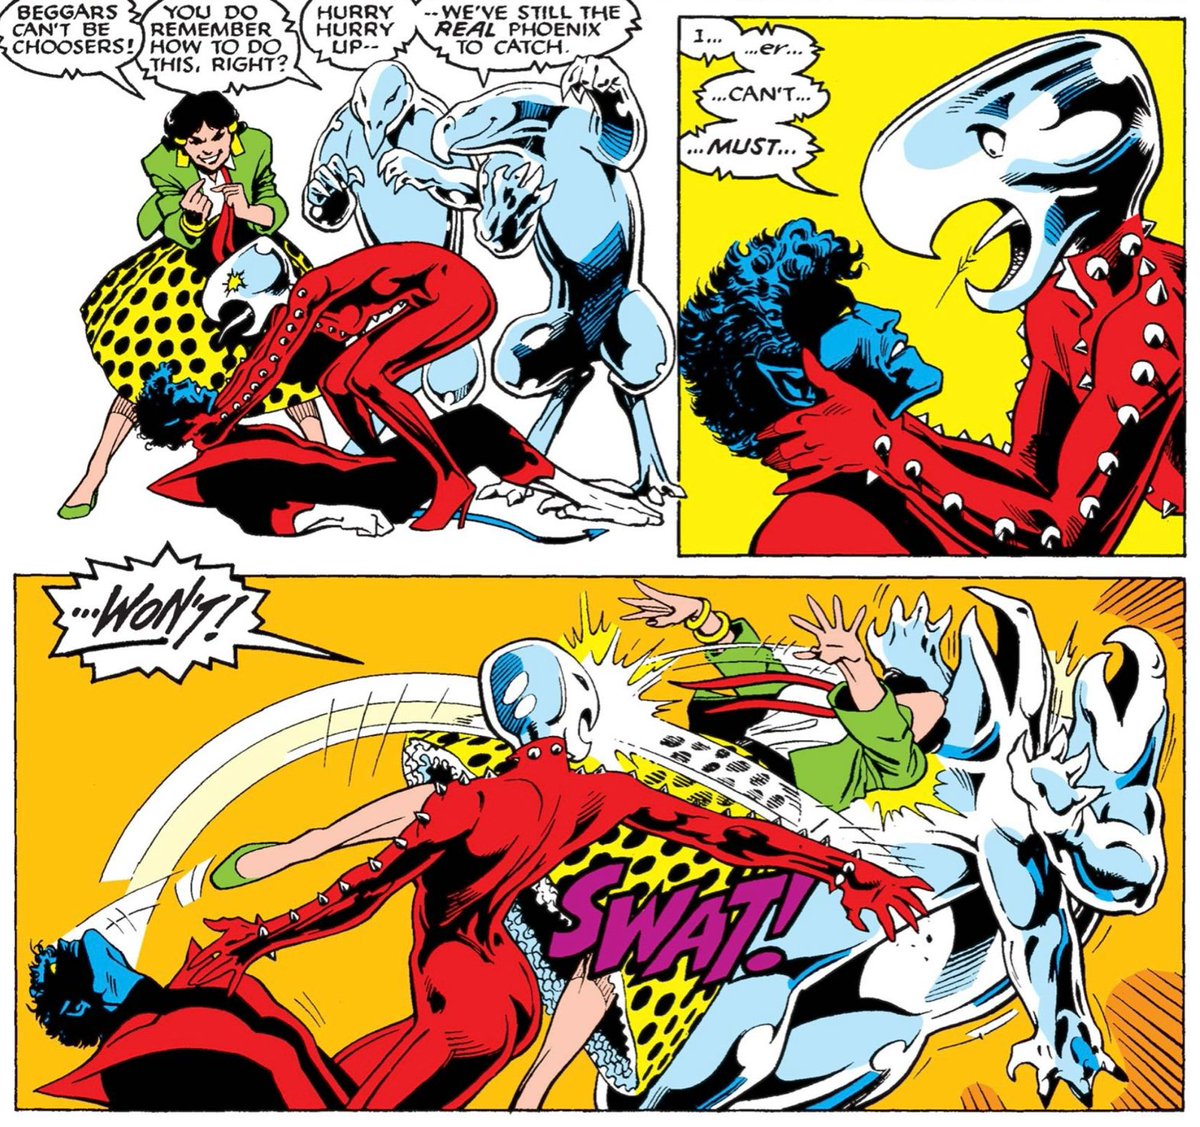 The Warwolf that tried (and failed?) to eat Kitty is changing shape, somehow becoming more…human?? Human-ish, at the very least. And when it has a chance to consume Nightcrawler, it refuses and attacks the other Warwolves instead! #marvel #excalibur